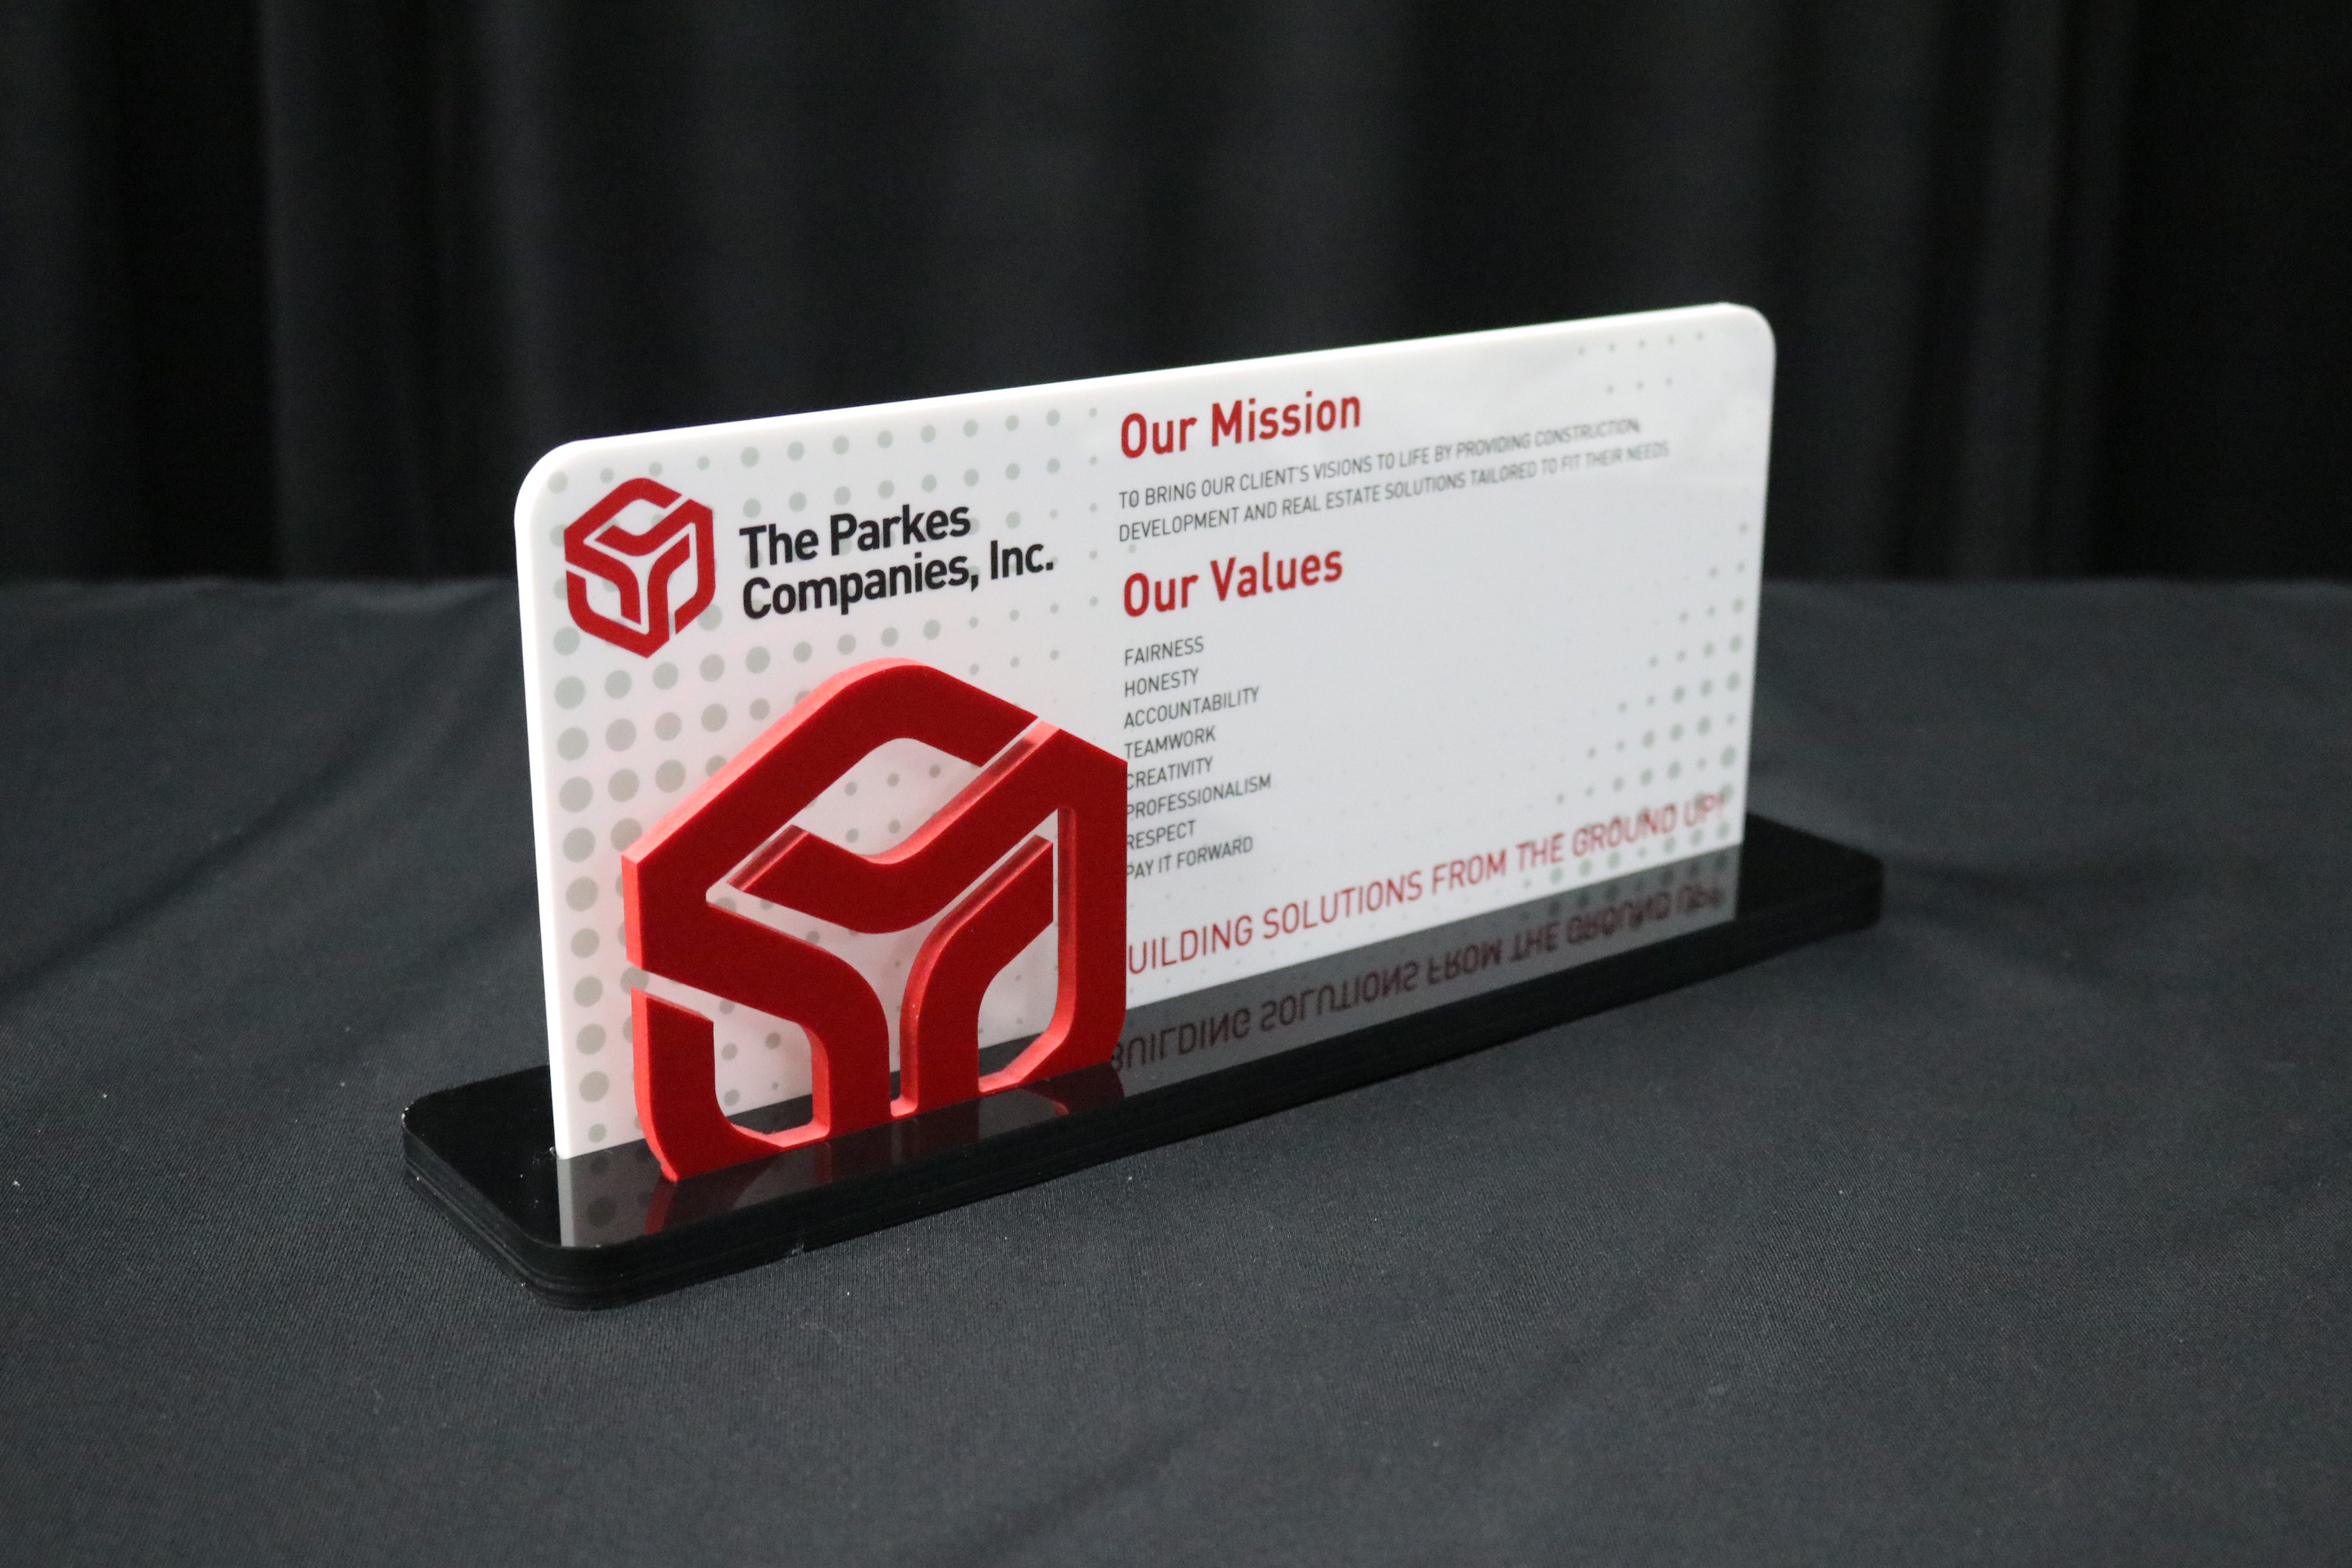 Conference room table top display with mission and core values printed on white acrylic, logo cut out of red pvc, inserted into black acrylic base.